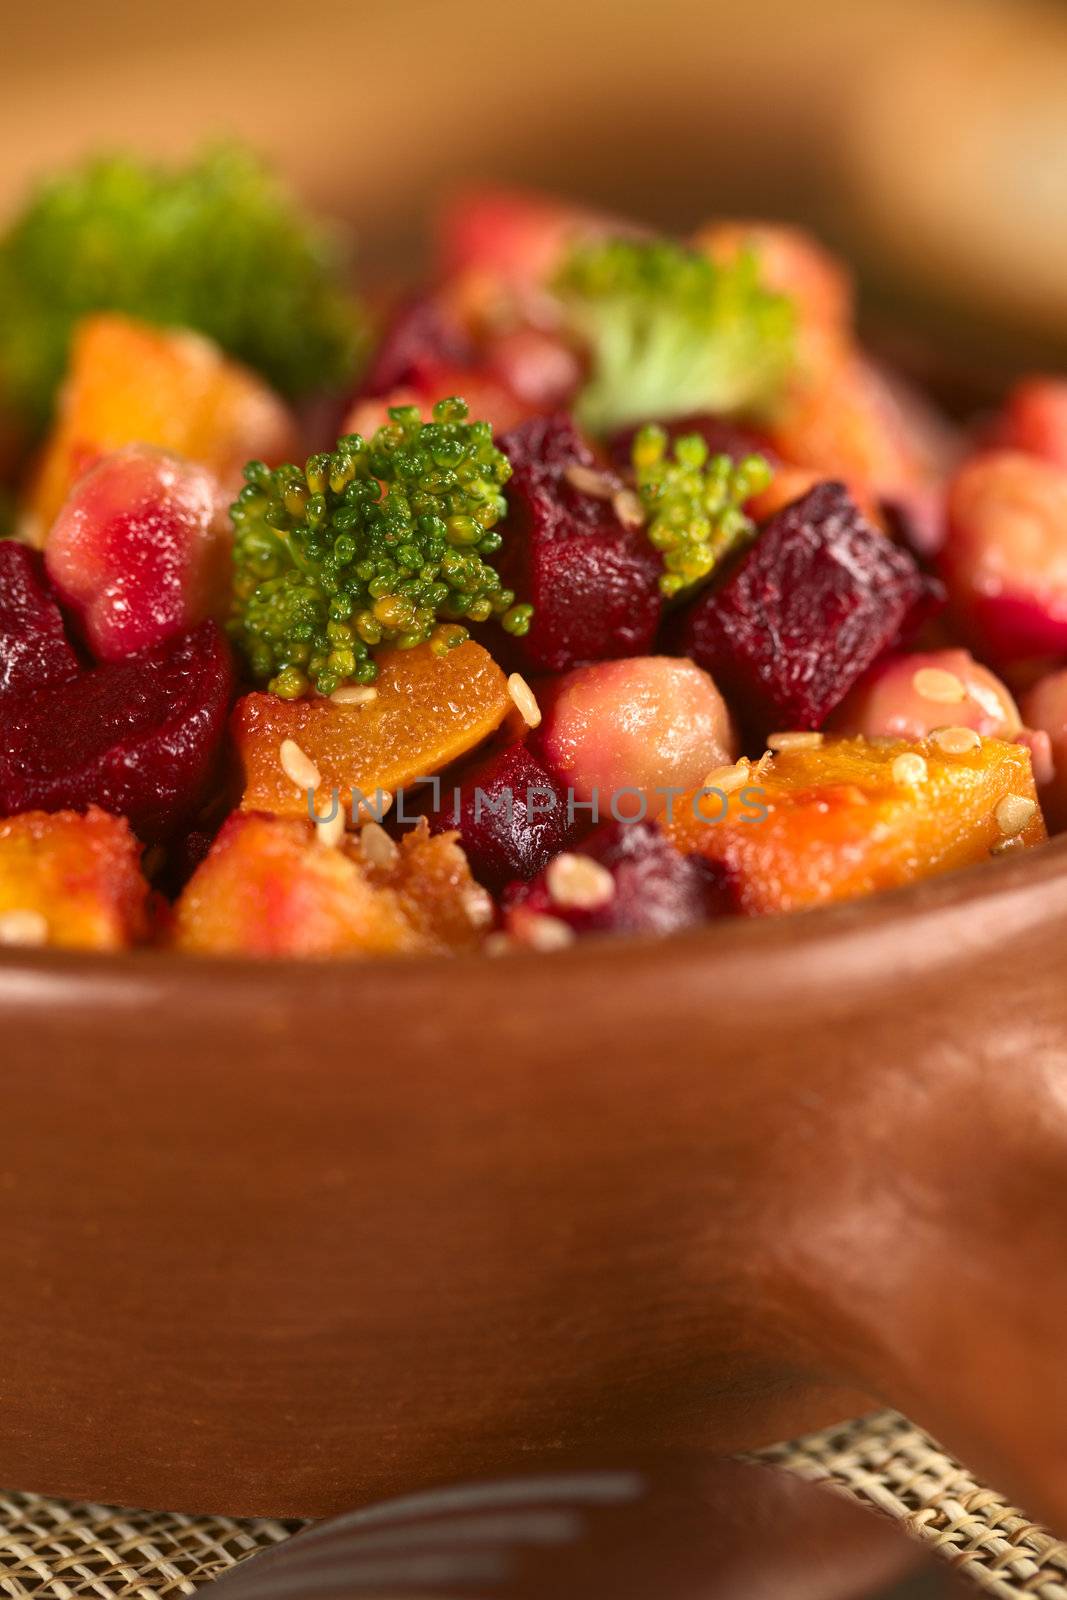 Pumpkin, beetroot, broccoli and chickpea salad garnished with sesame seeds (Selective Focus, Focus on the bigger broccoli floret in the front and the vegetables around it) 